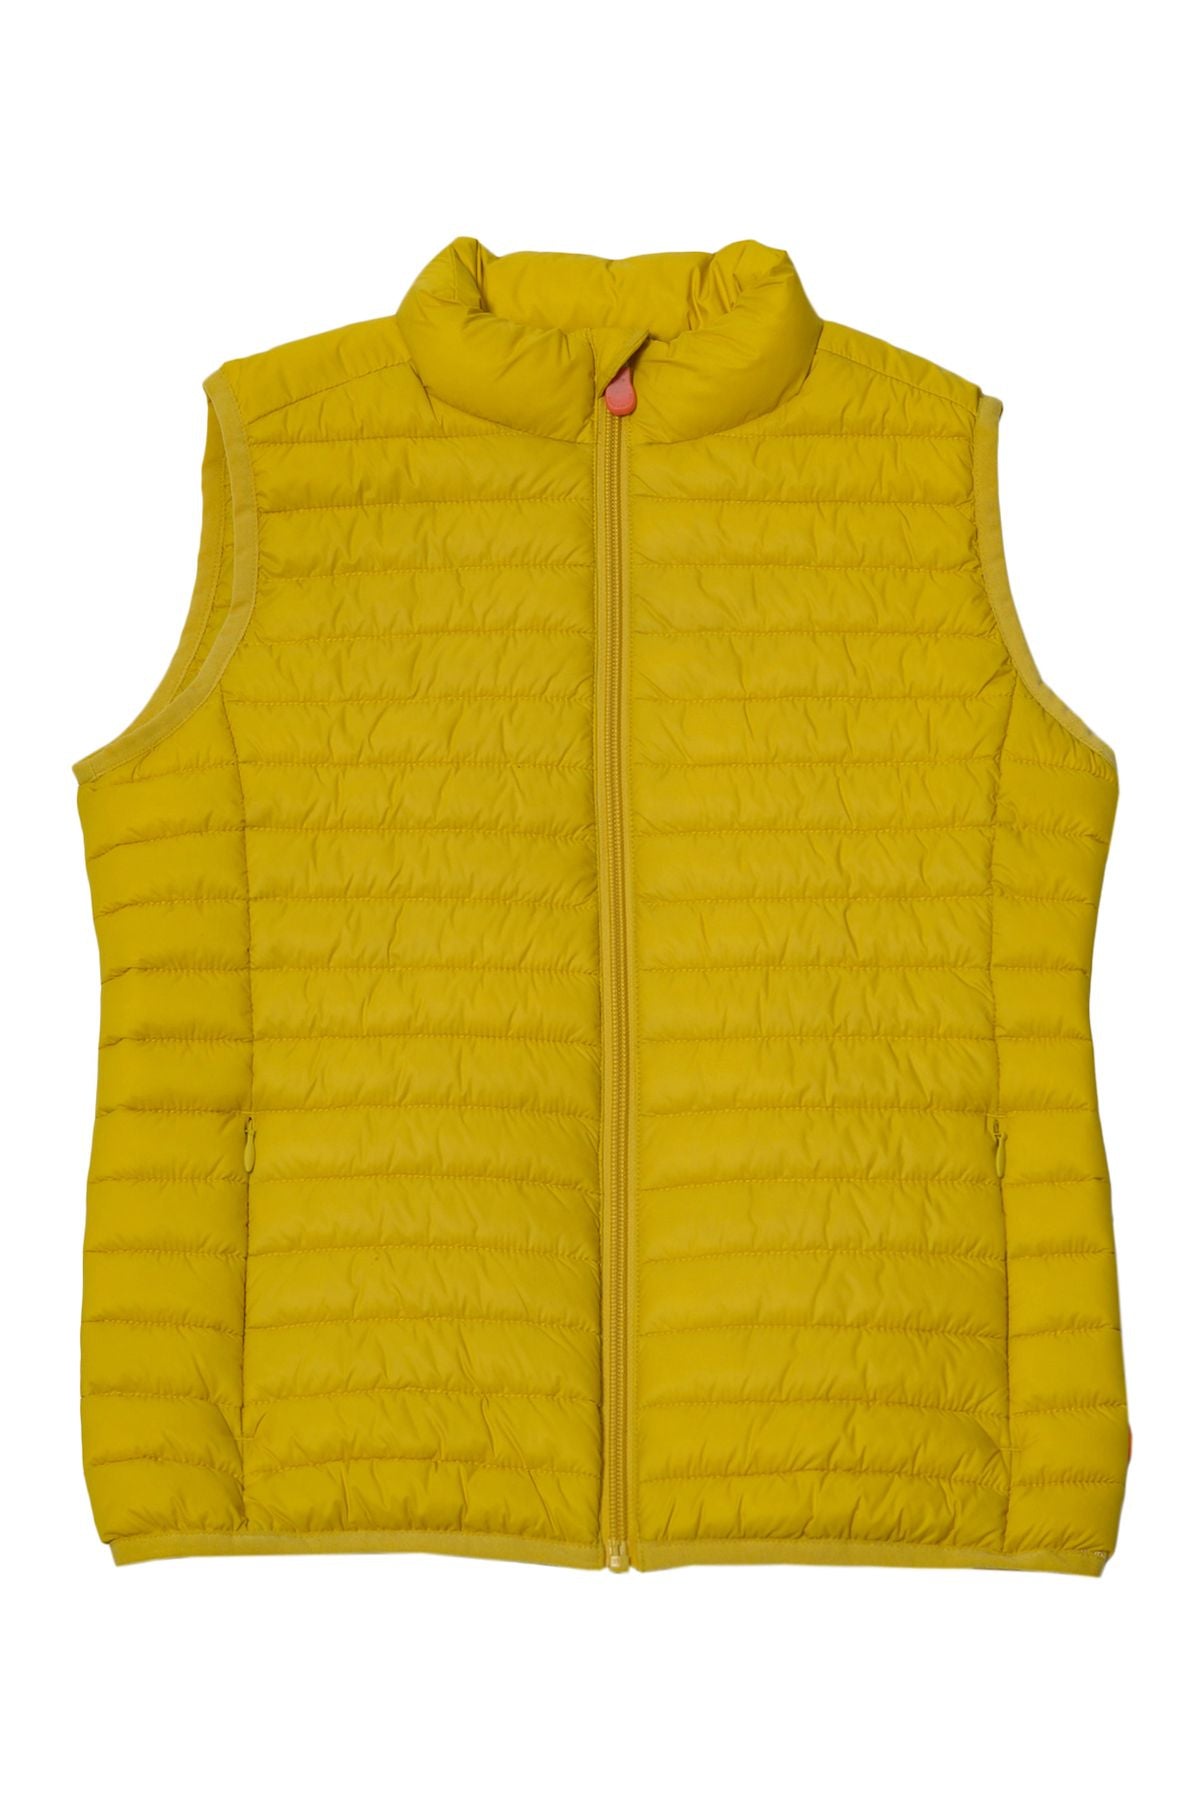 SAVE THE DUCK Spring/Summer Nylon Down Jackets